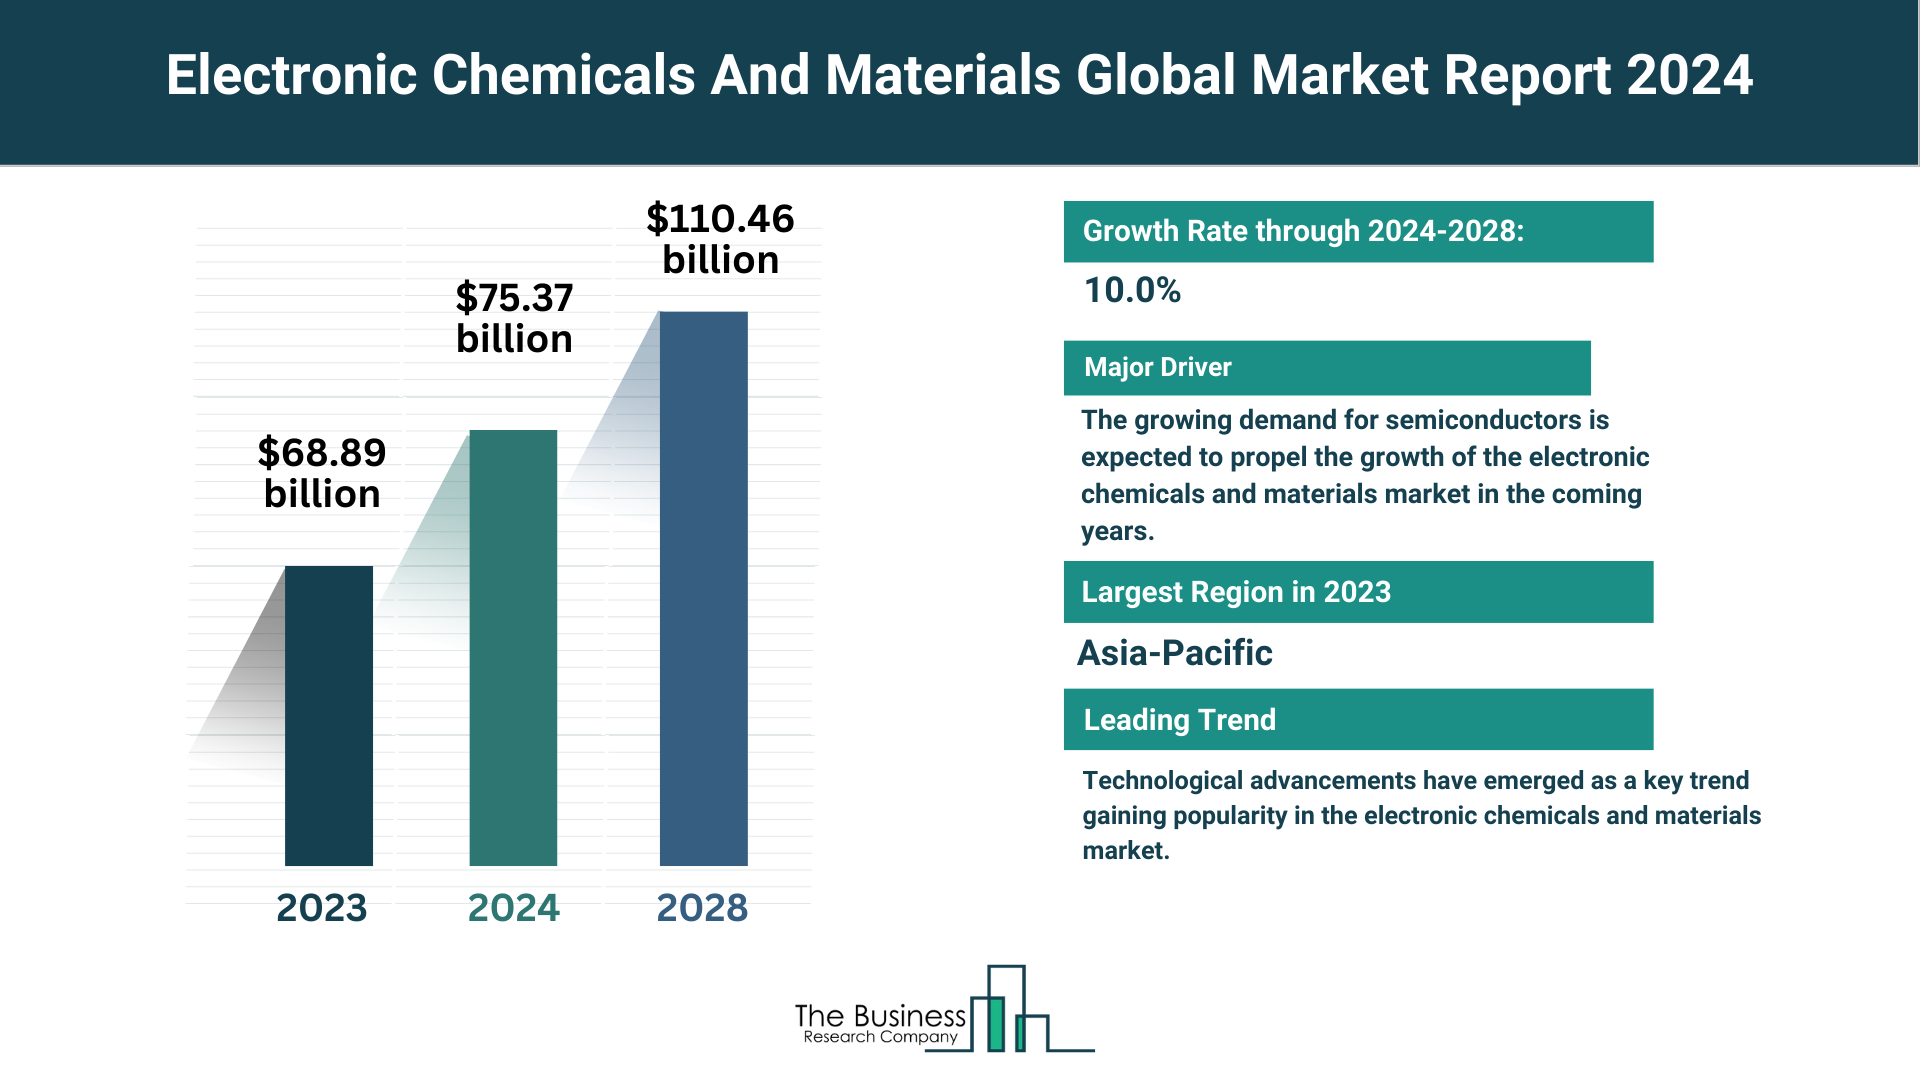 What Are The 5 Top Insights From The Electronic Chemicals And Materials Market Forecast 2024